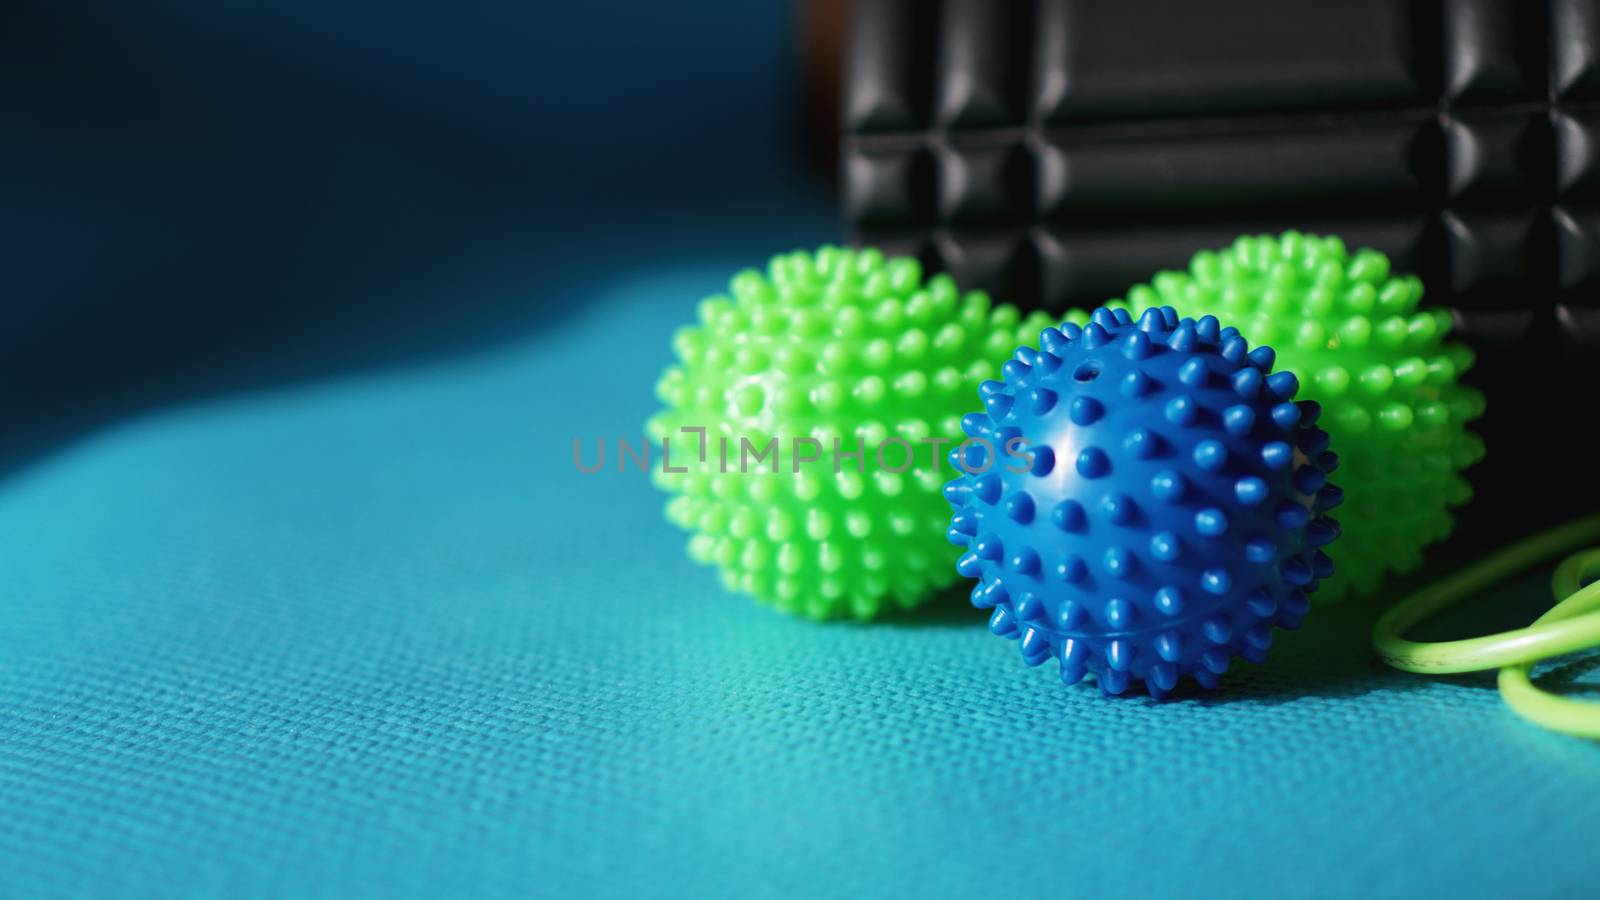 Massage ball roller for self massage, reflexology and myofascial release on blue by natali_brill